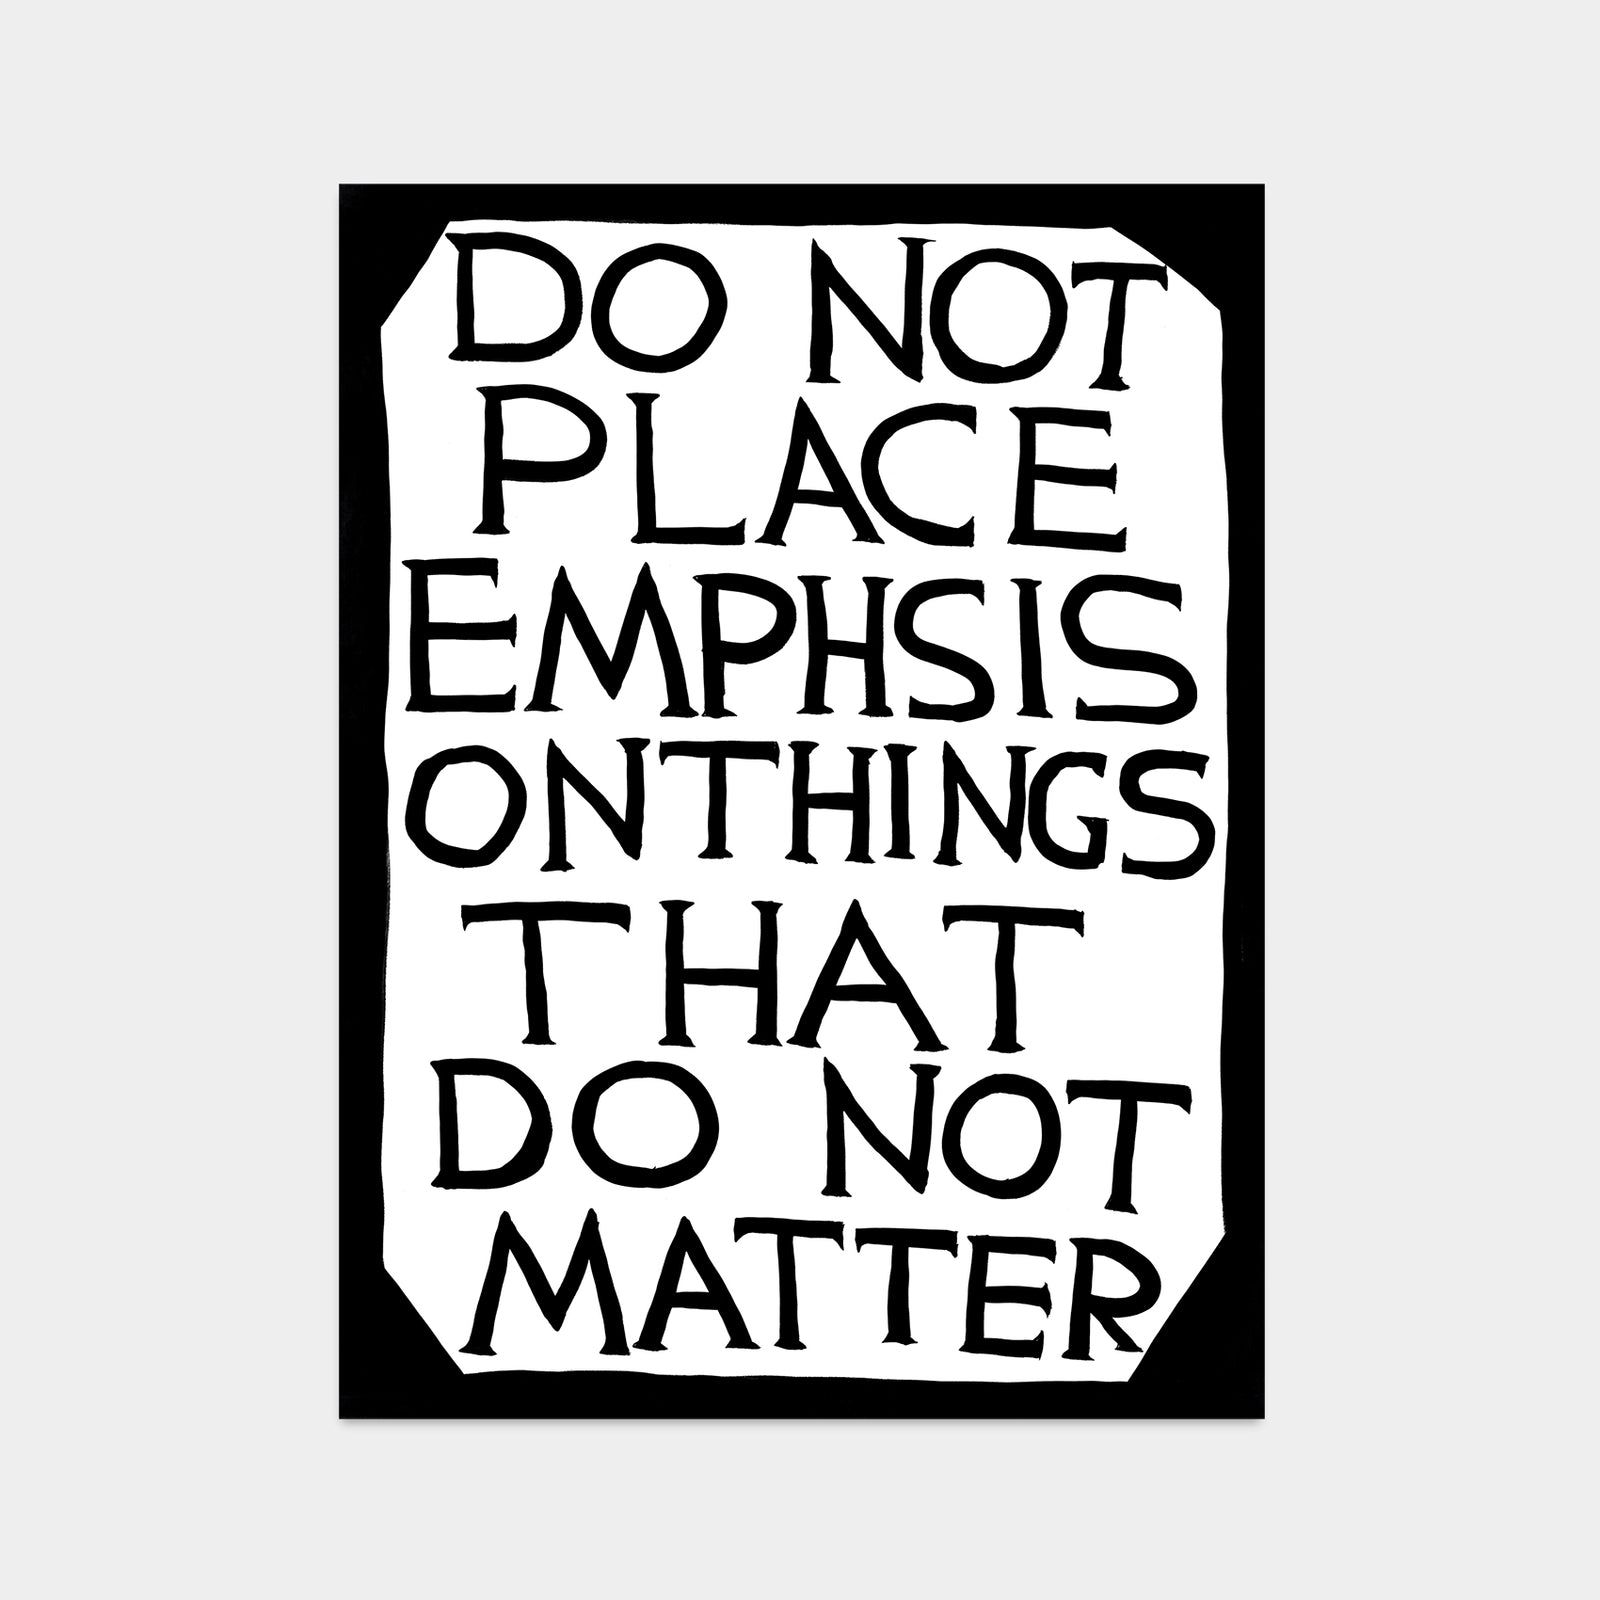 Do Not Place Emphasis On Things That Do Not Matter